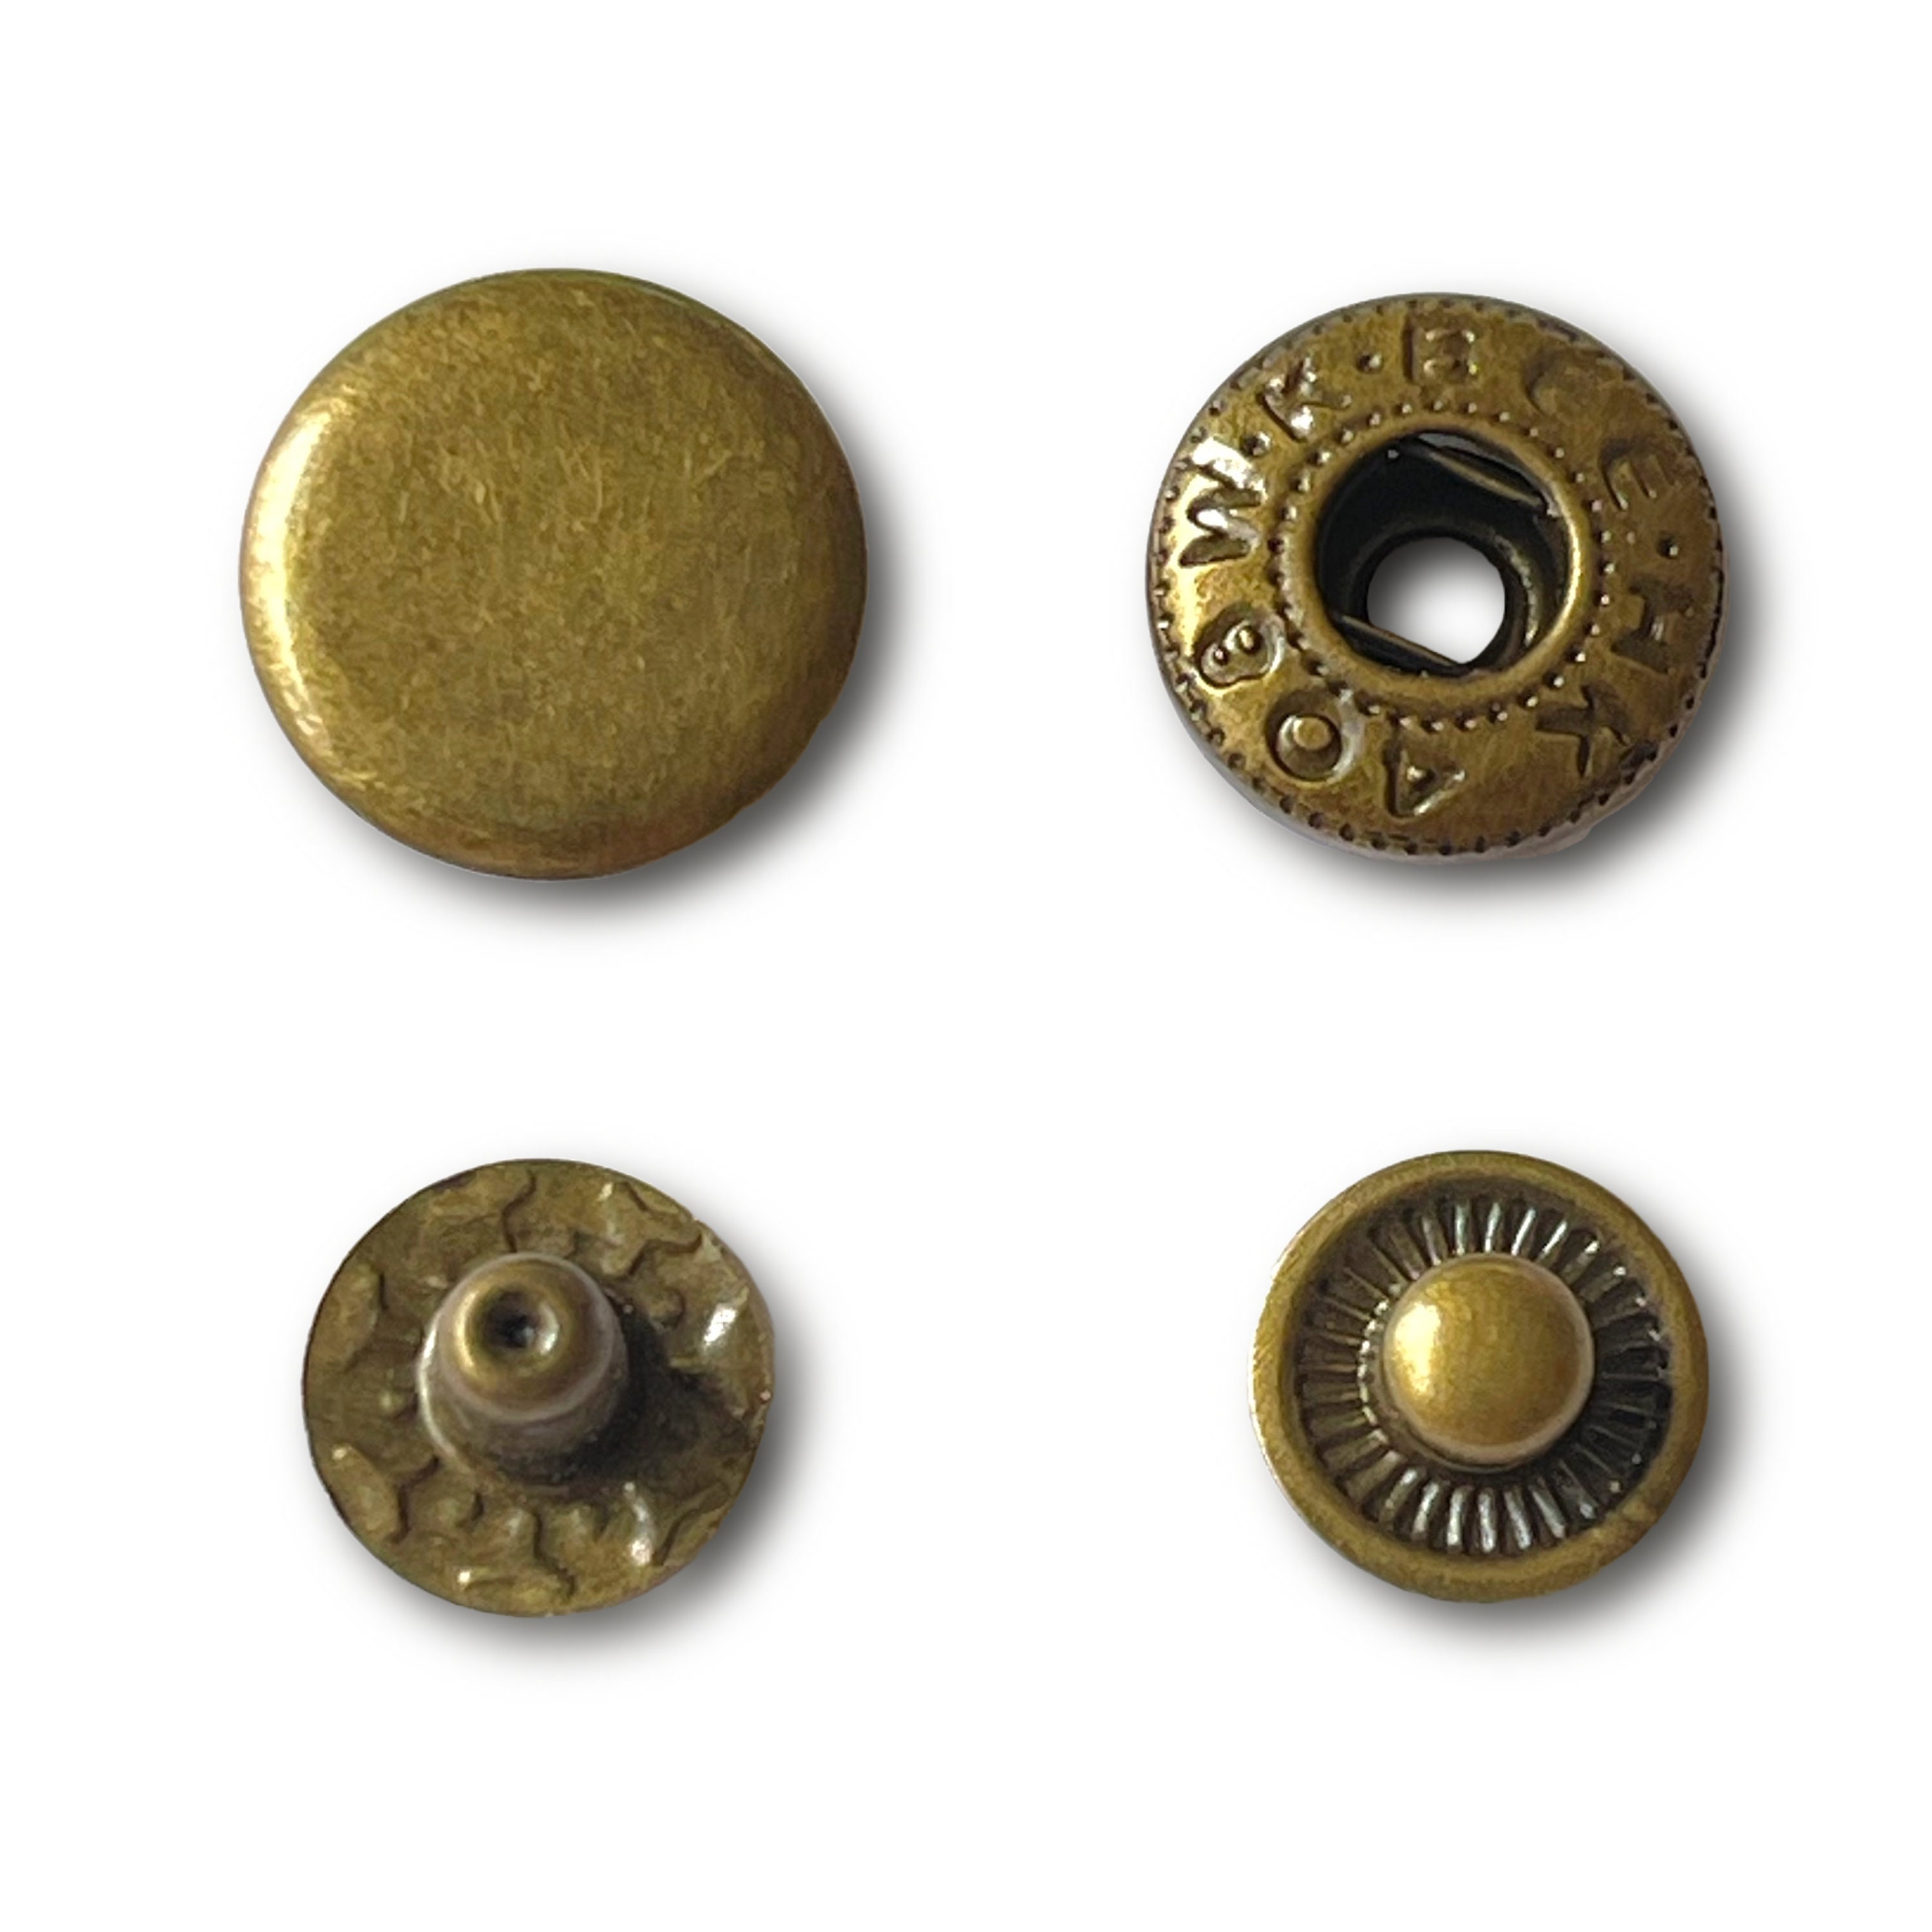 Yellow, Round, Hasi-Hato steel snap button with S-spring and 12.5 mm  diameter for leather craft